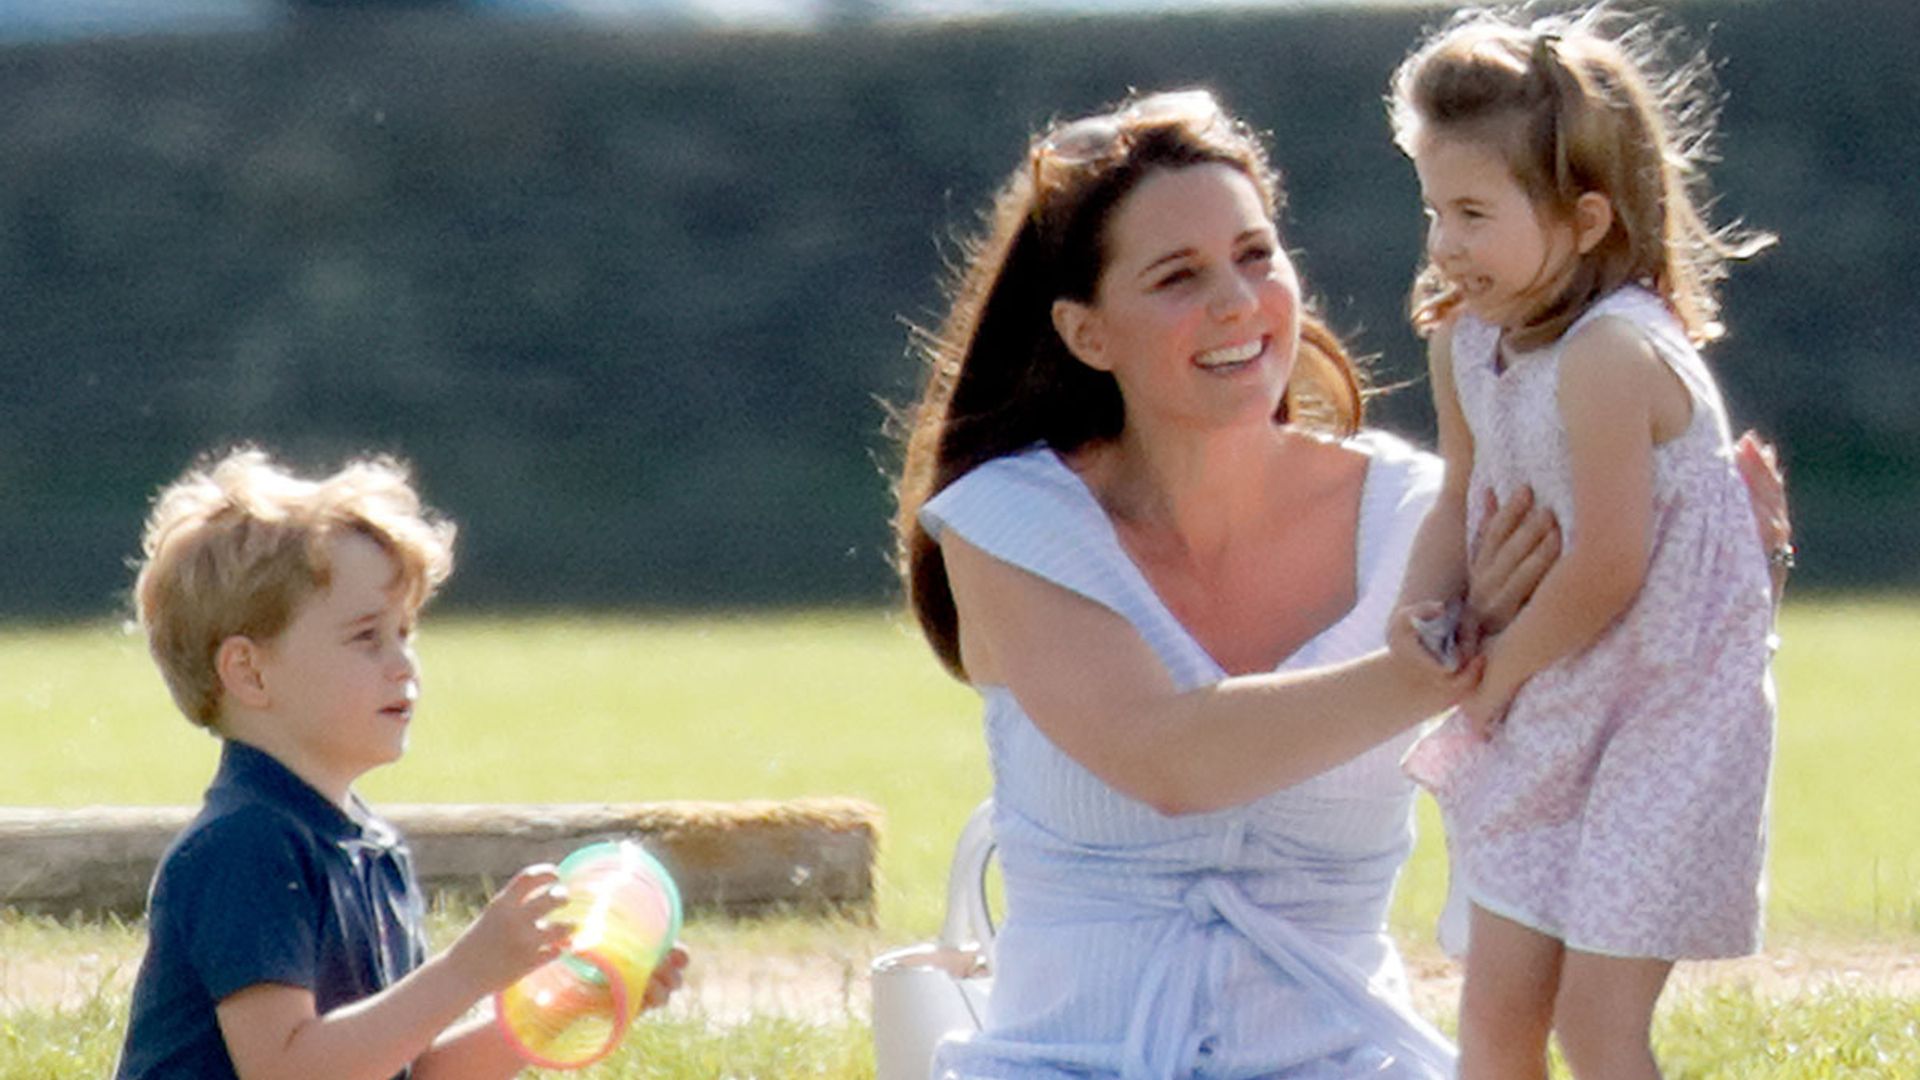 The sweet baking tradition Kate Middleton does for her children